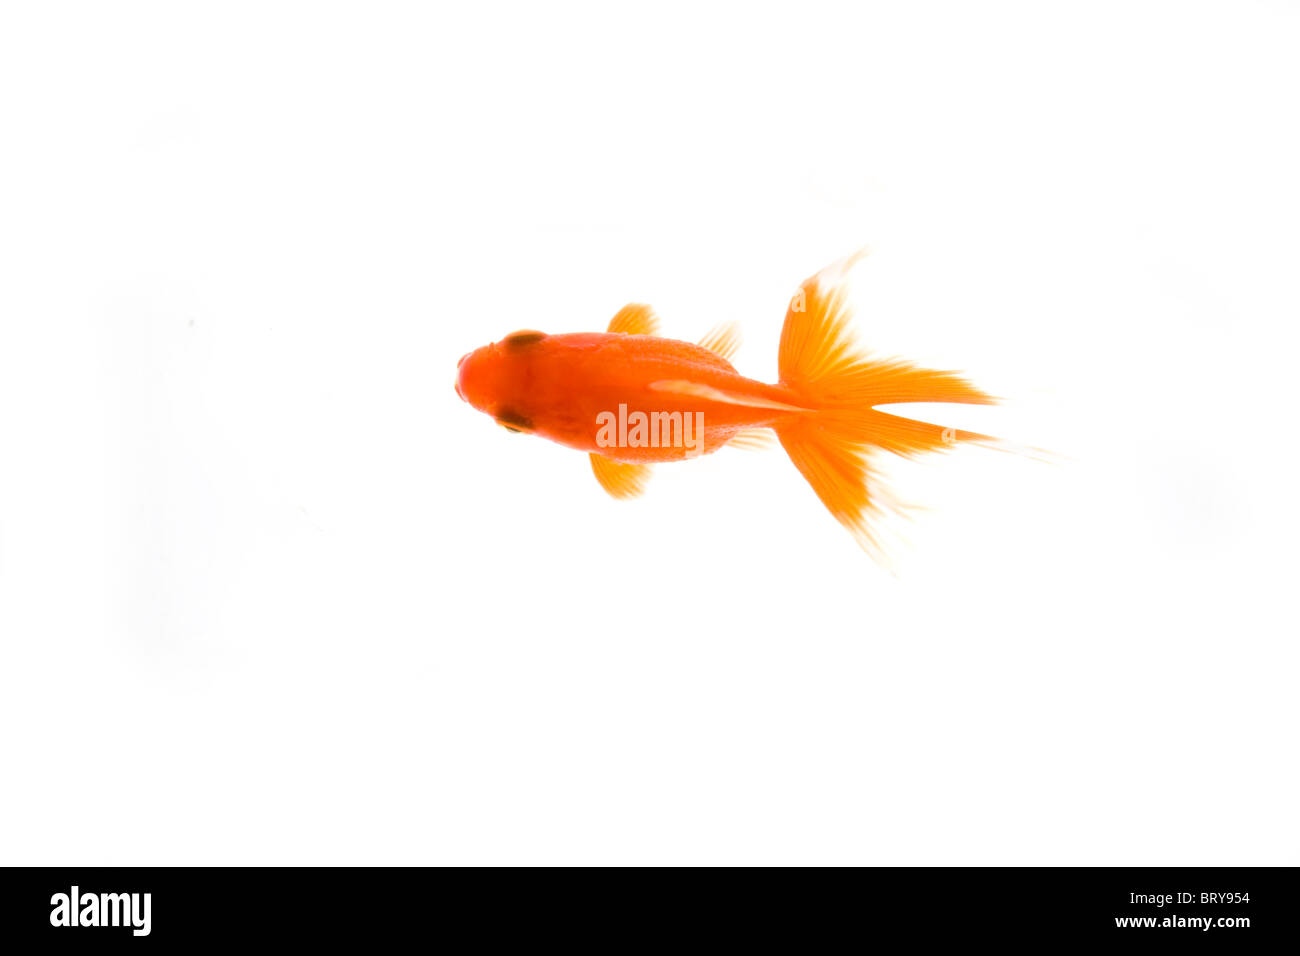 Goldfish High angle view Banque D'Images